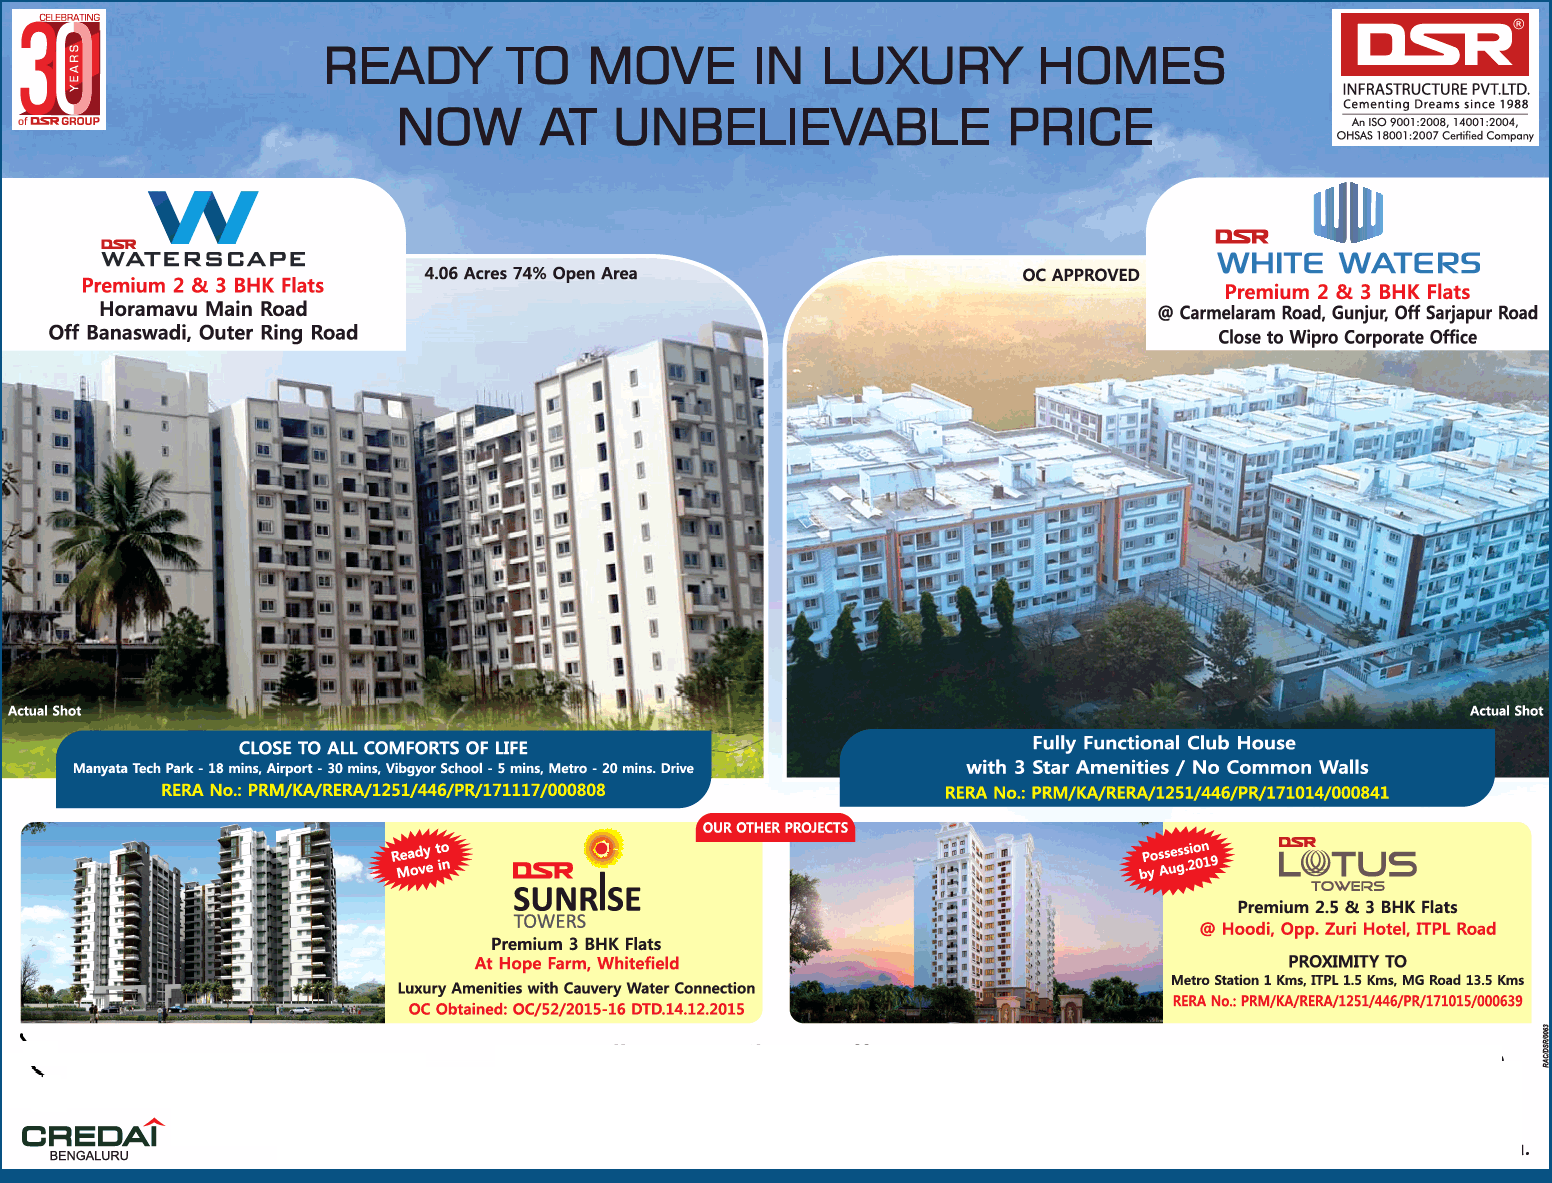 Ready to move in luxury homes now at unbelievable price by DSR Infrastructure, Bangalore Update